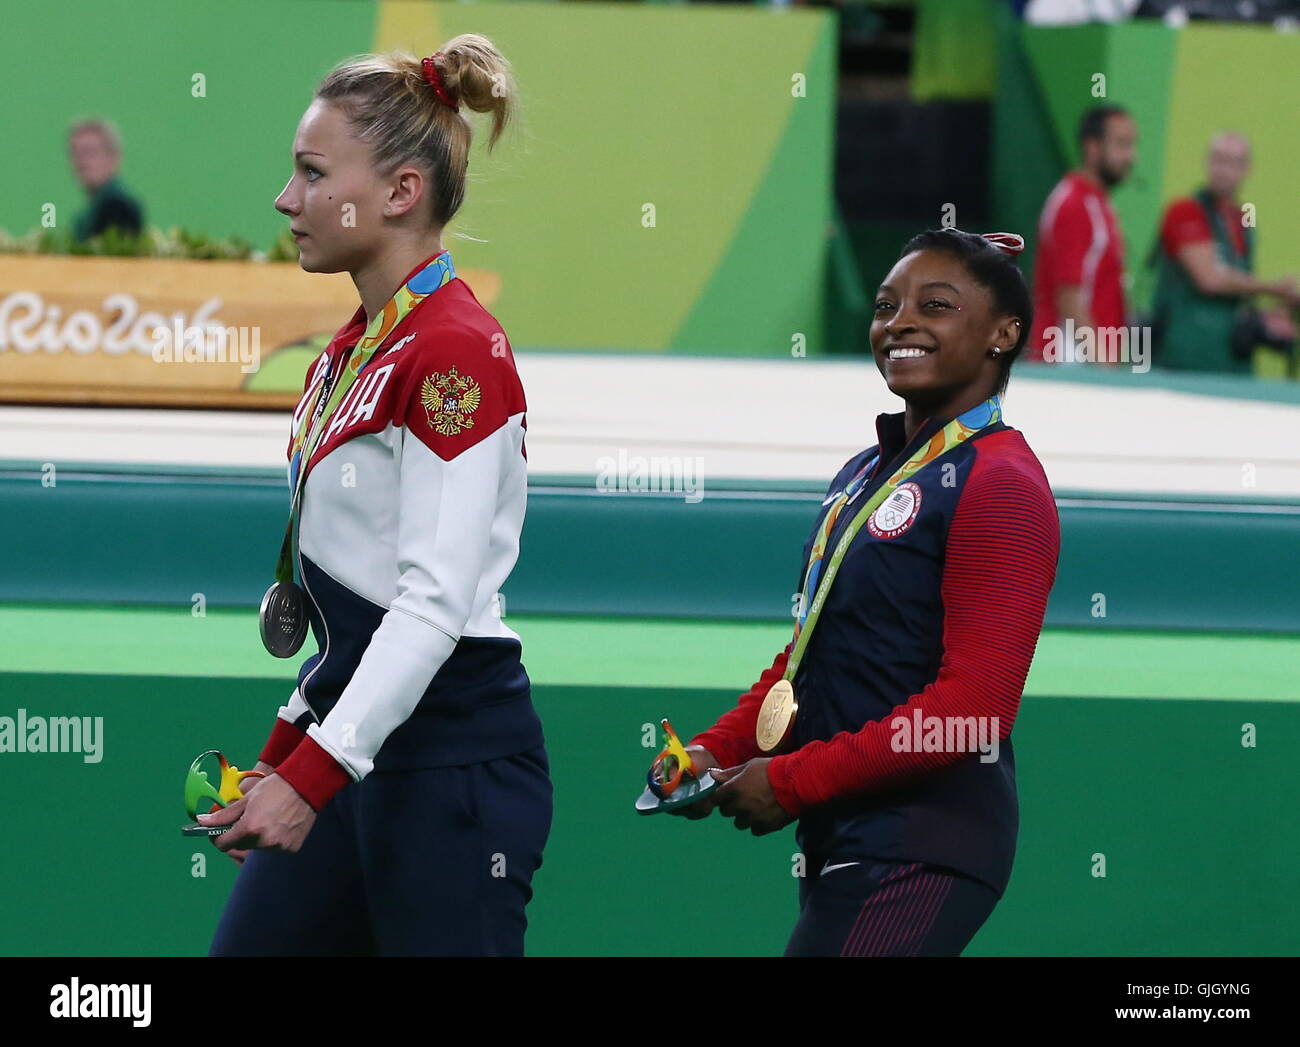 Rio De Janeiro, Brazil. 14th Aug, 2016. Silver medallist Maria Paseka of  Russia (L) and gold medal winner Simone Biles of the United States during  the medal ceremony for the women's artistic